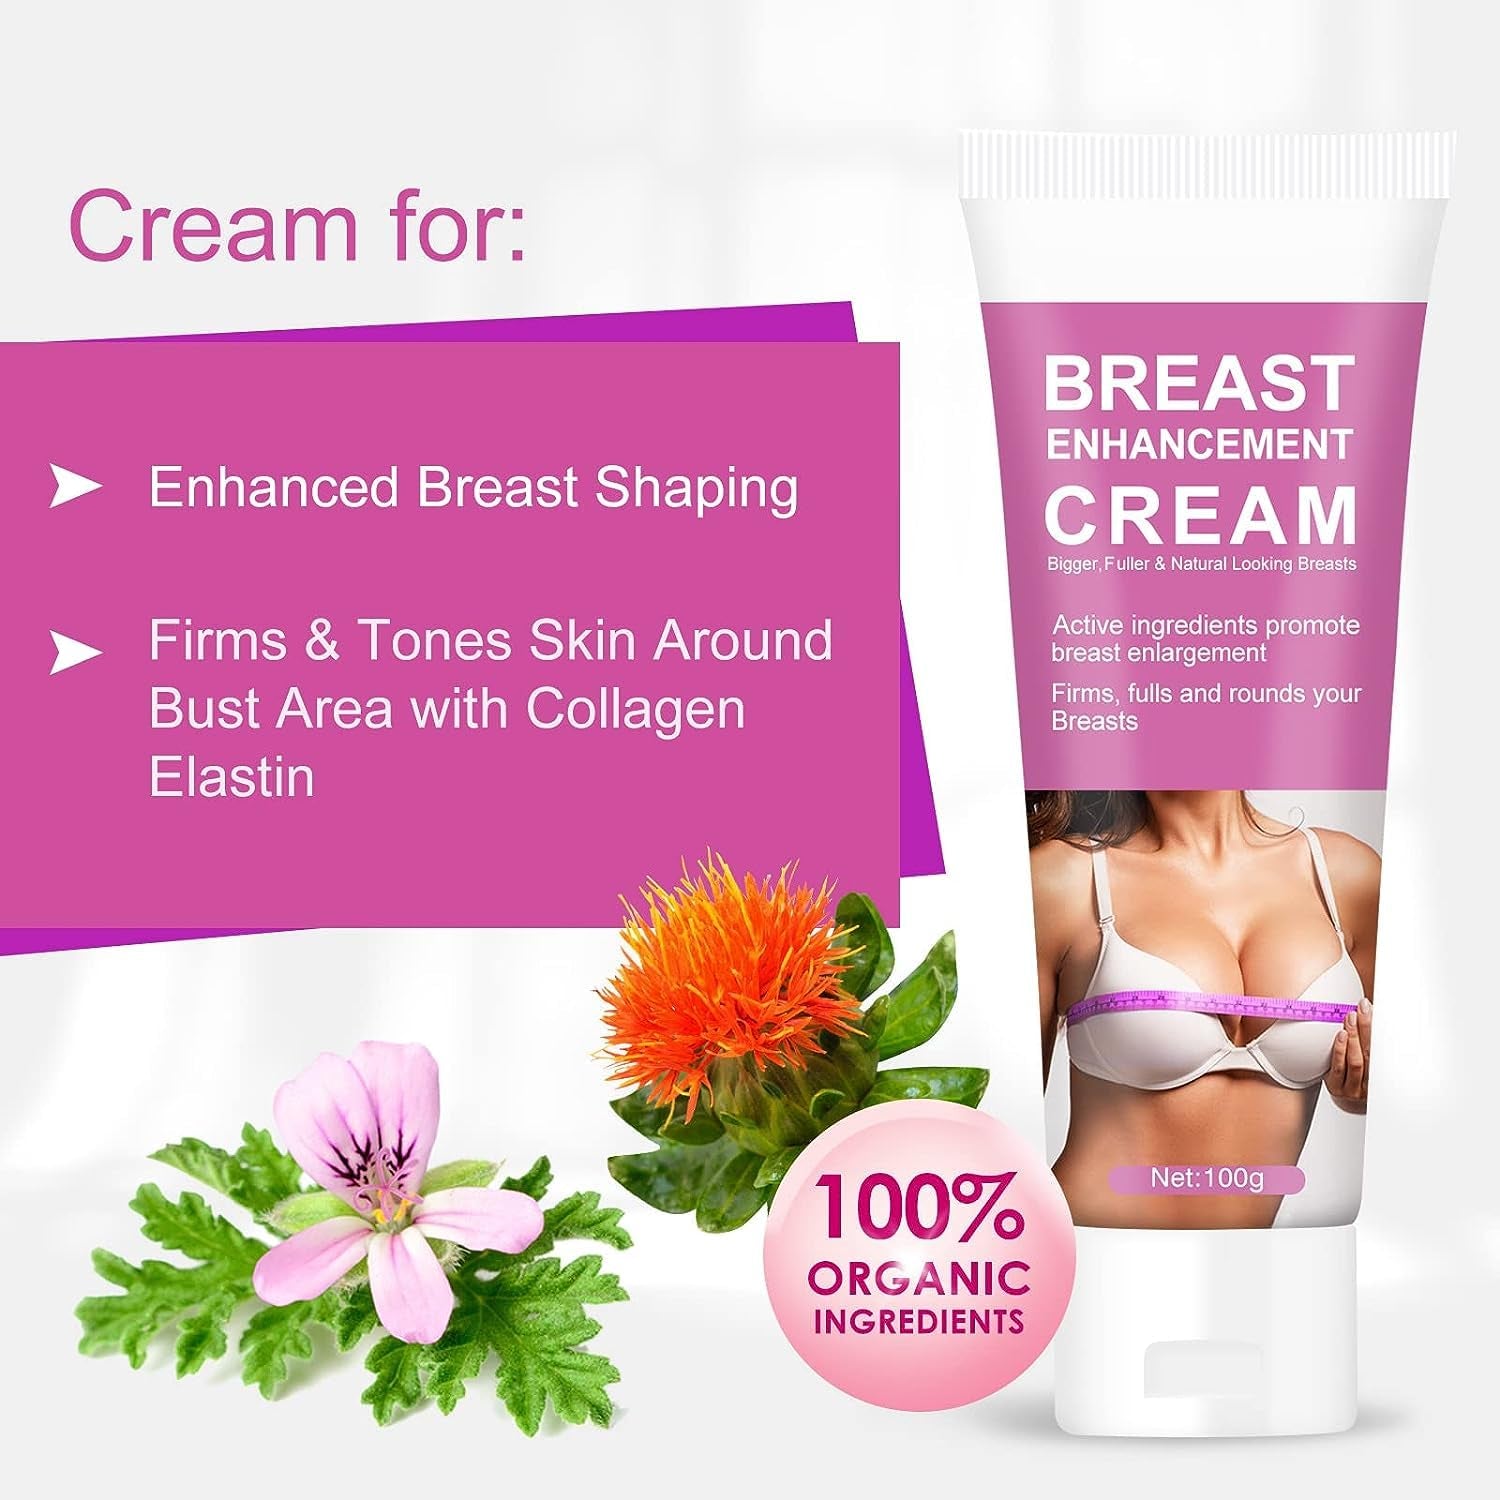 Breast Enhancement Cream, Breast Enlargement Cream Fast Growth, Firming and Lifting Cream, Plumps and Lifts Your Breasts and Improves Sagging Breasts